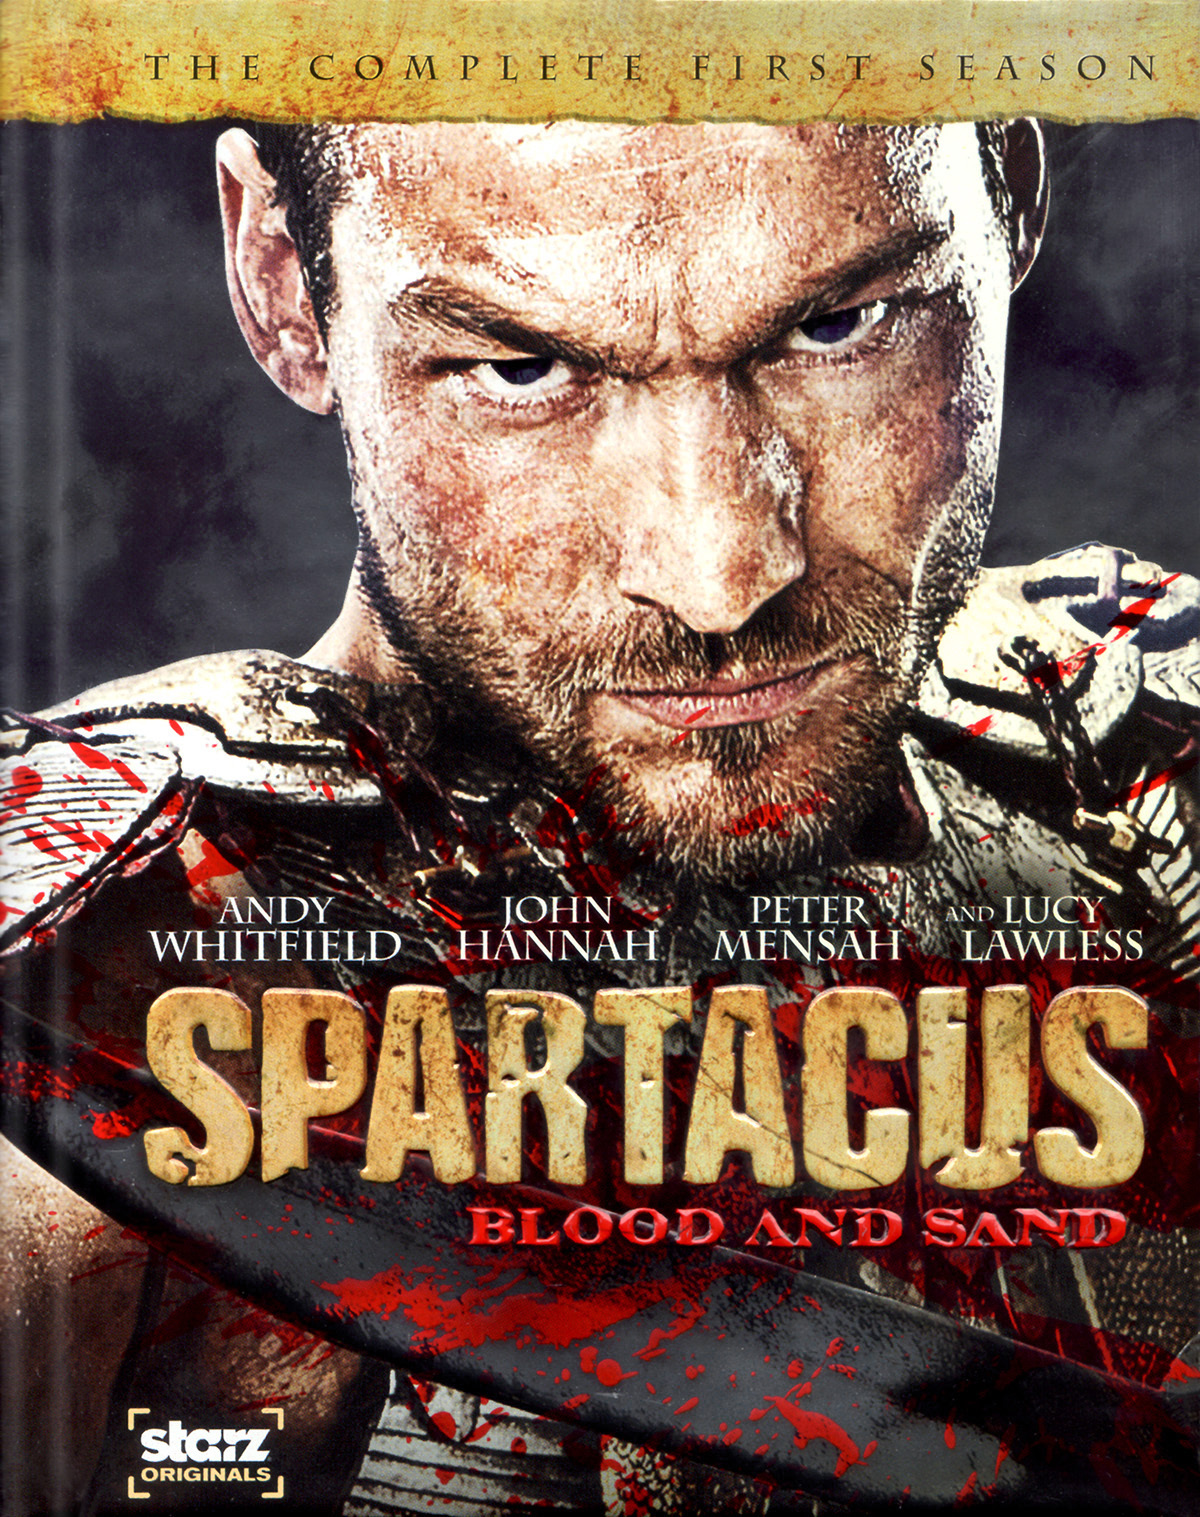 spartacus season 1 watch online free full episode in hindi dubbed